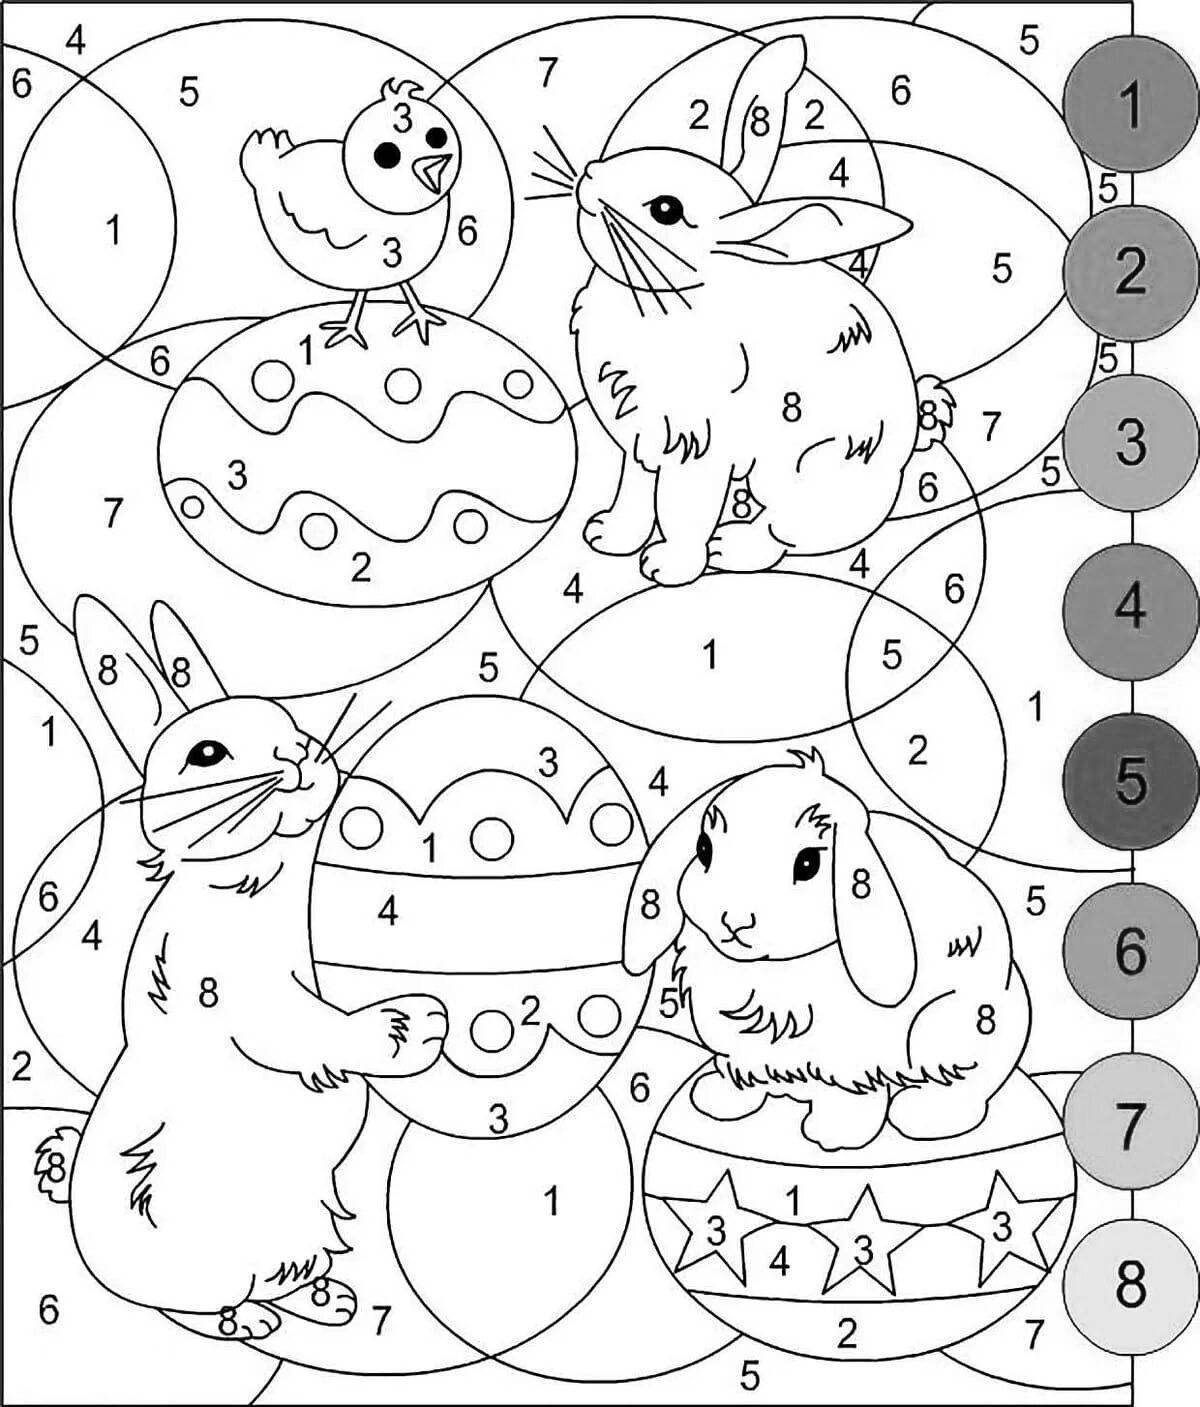 Amazing animal coloring pages by numbers